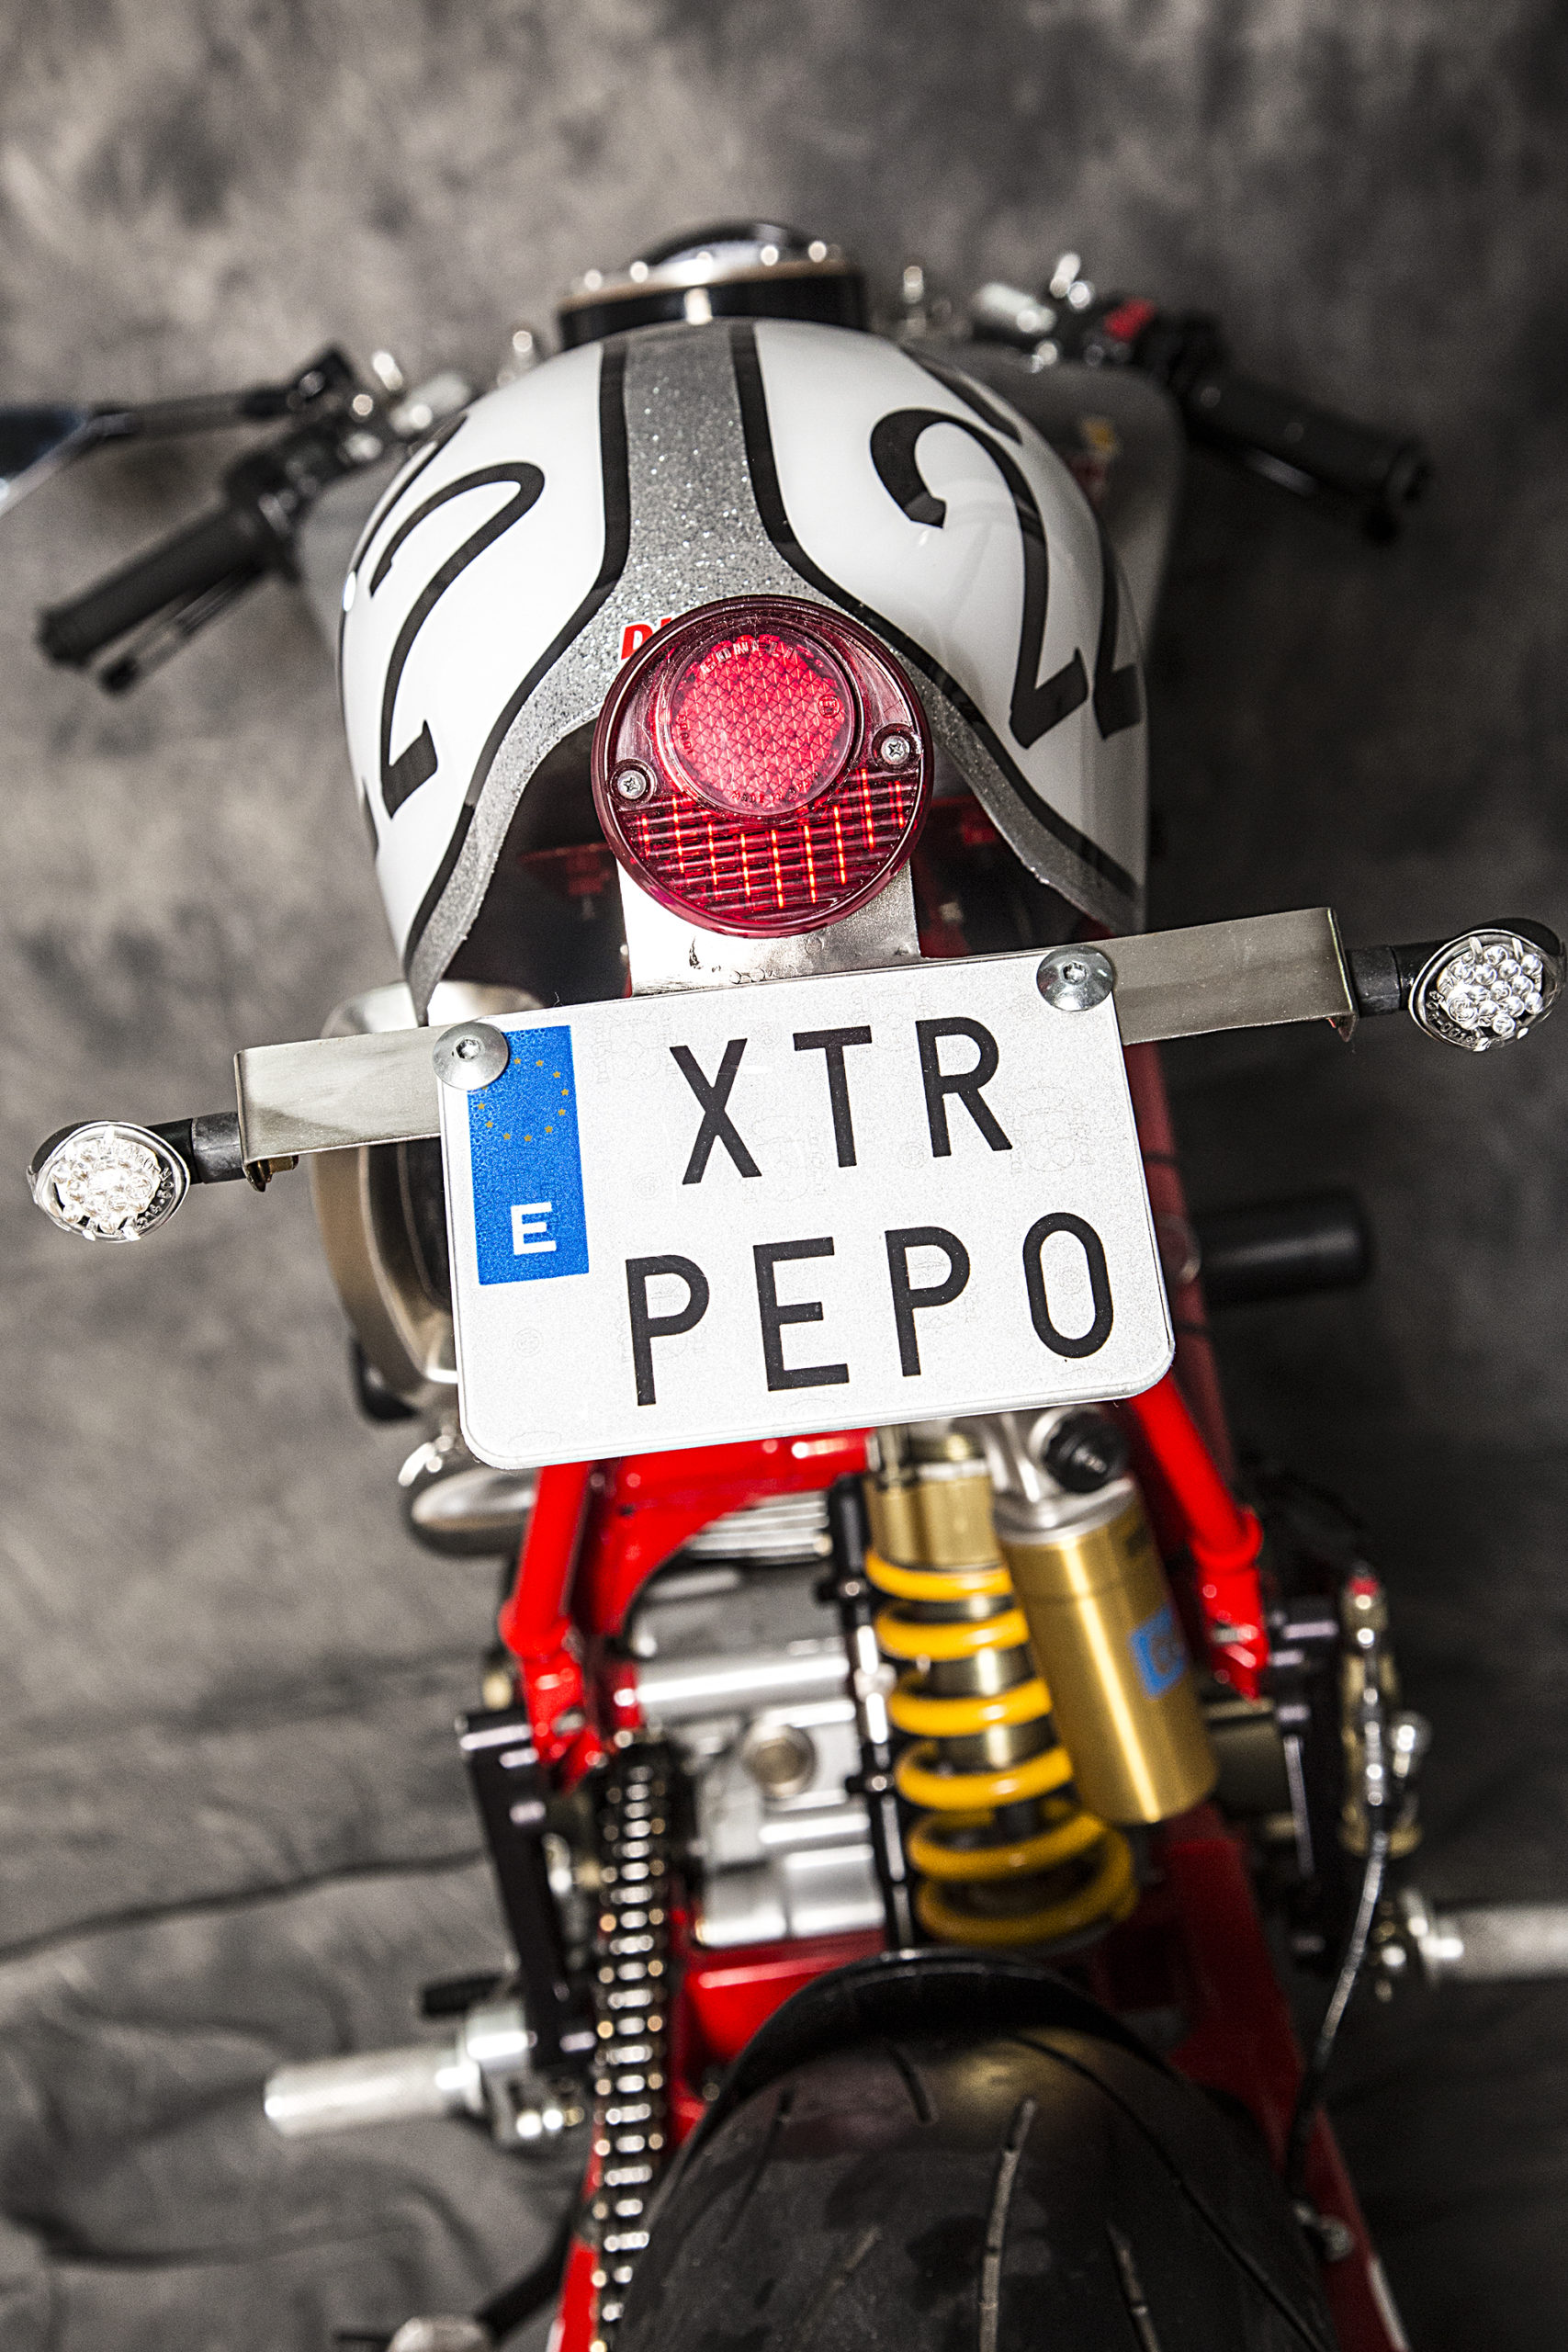 A view of the 2003 Ducati Monster 1000 courtesy of XTR Pepo that was outfitted to the extreme for both the road and the track